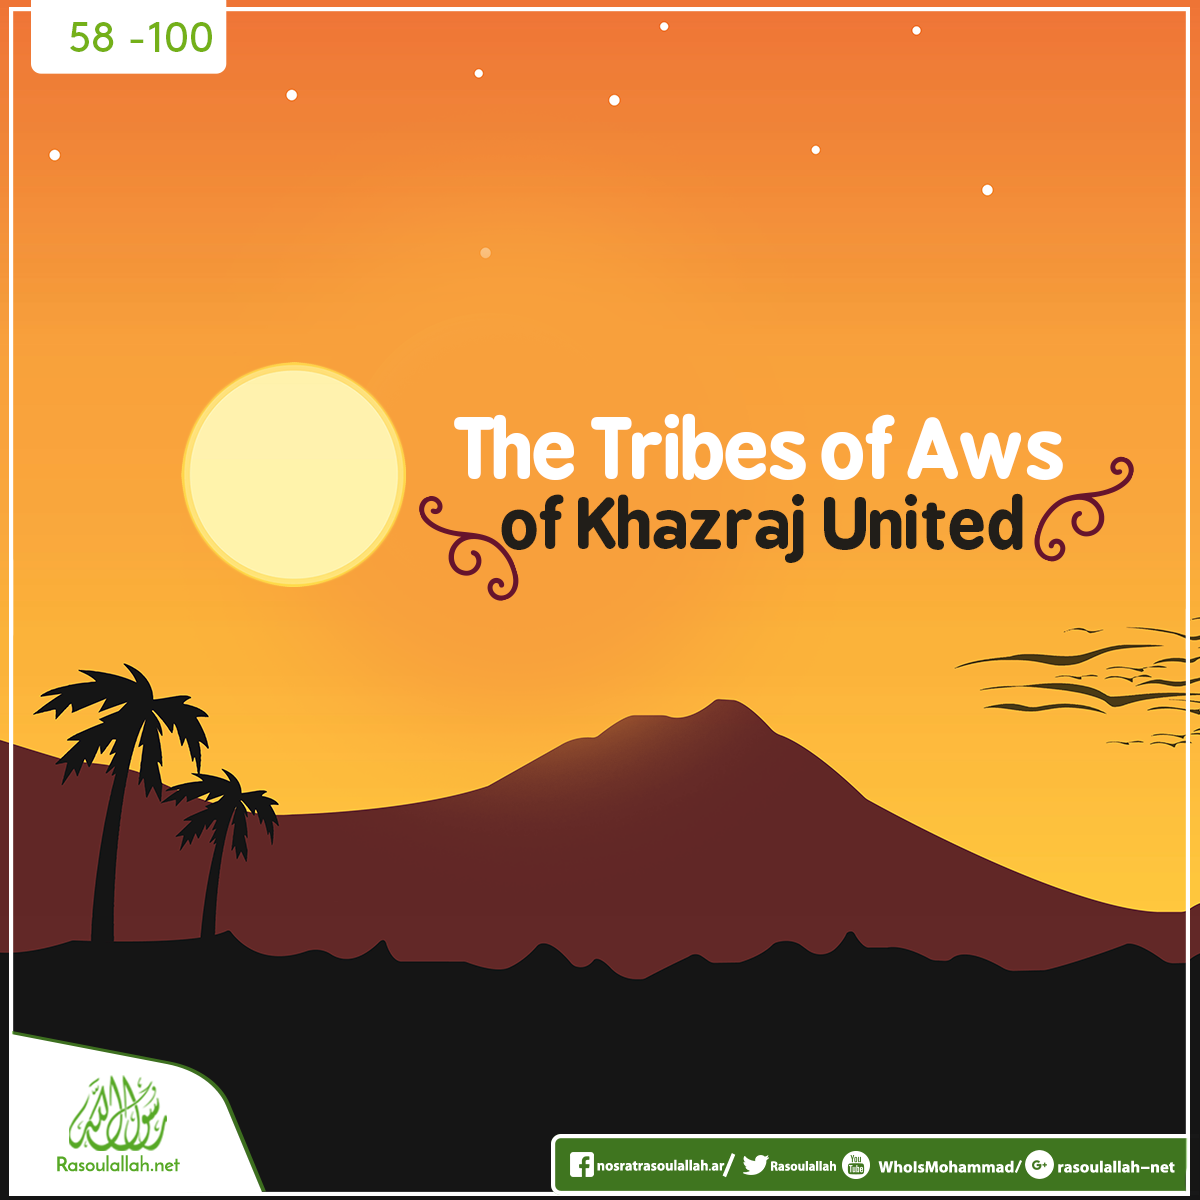 The Tribes of Aws and Khazraj United